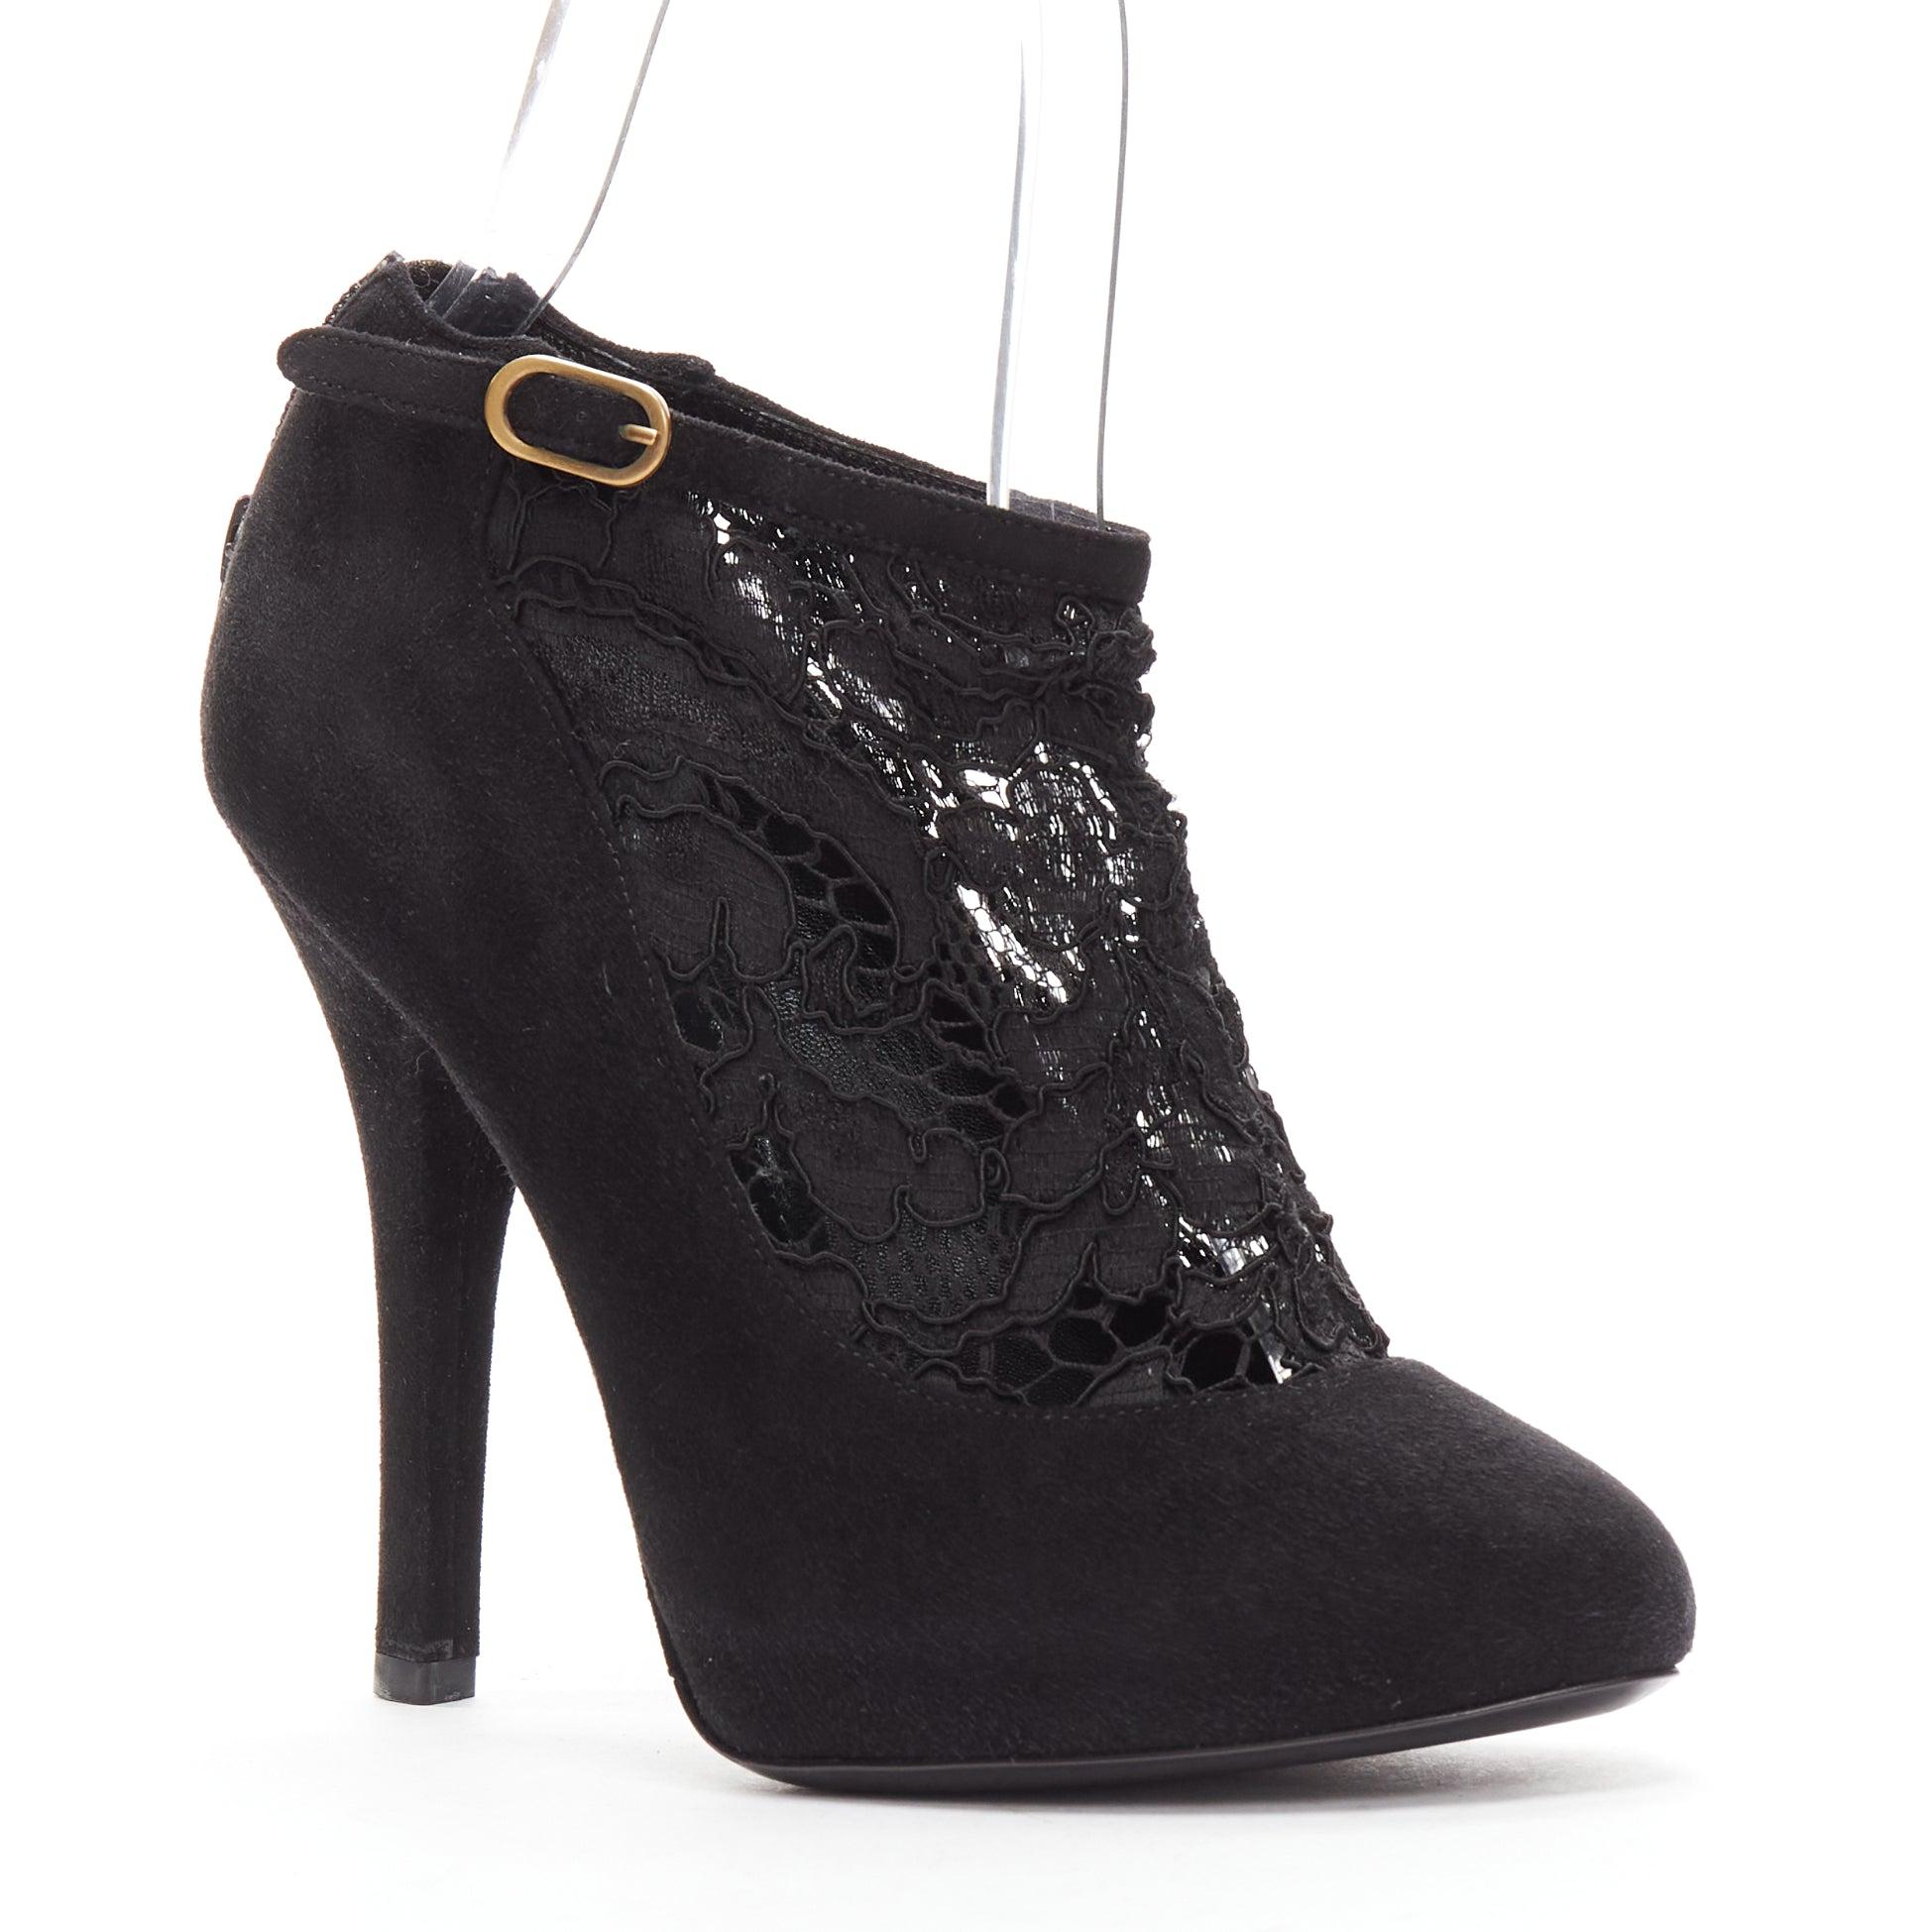 DOLCE GABBANA black suede floral lace ankle high heel ankle booties EU36
Reference: CELE/A00008
Brand: Dolce Gabbana
Designer: Domenico Dolce and Stefano Gabbana
Material: Suede
Color: Gold, Black
Pattern: Lace
Closure: Ankle Strap
Lining: Black